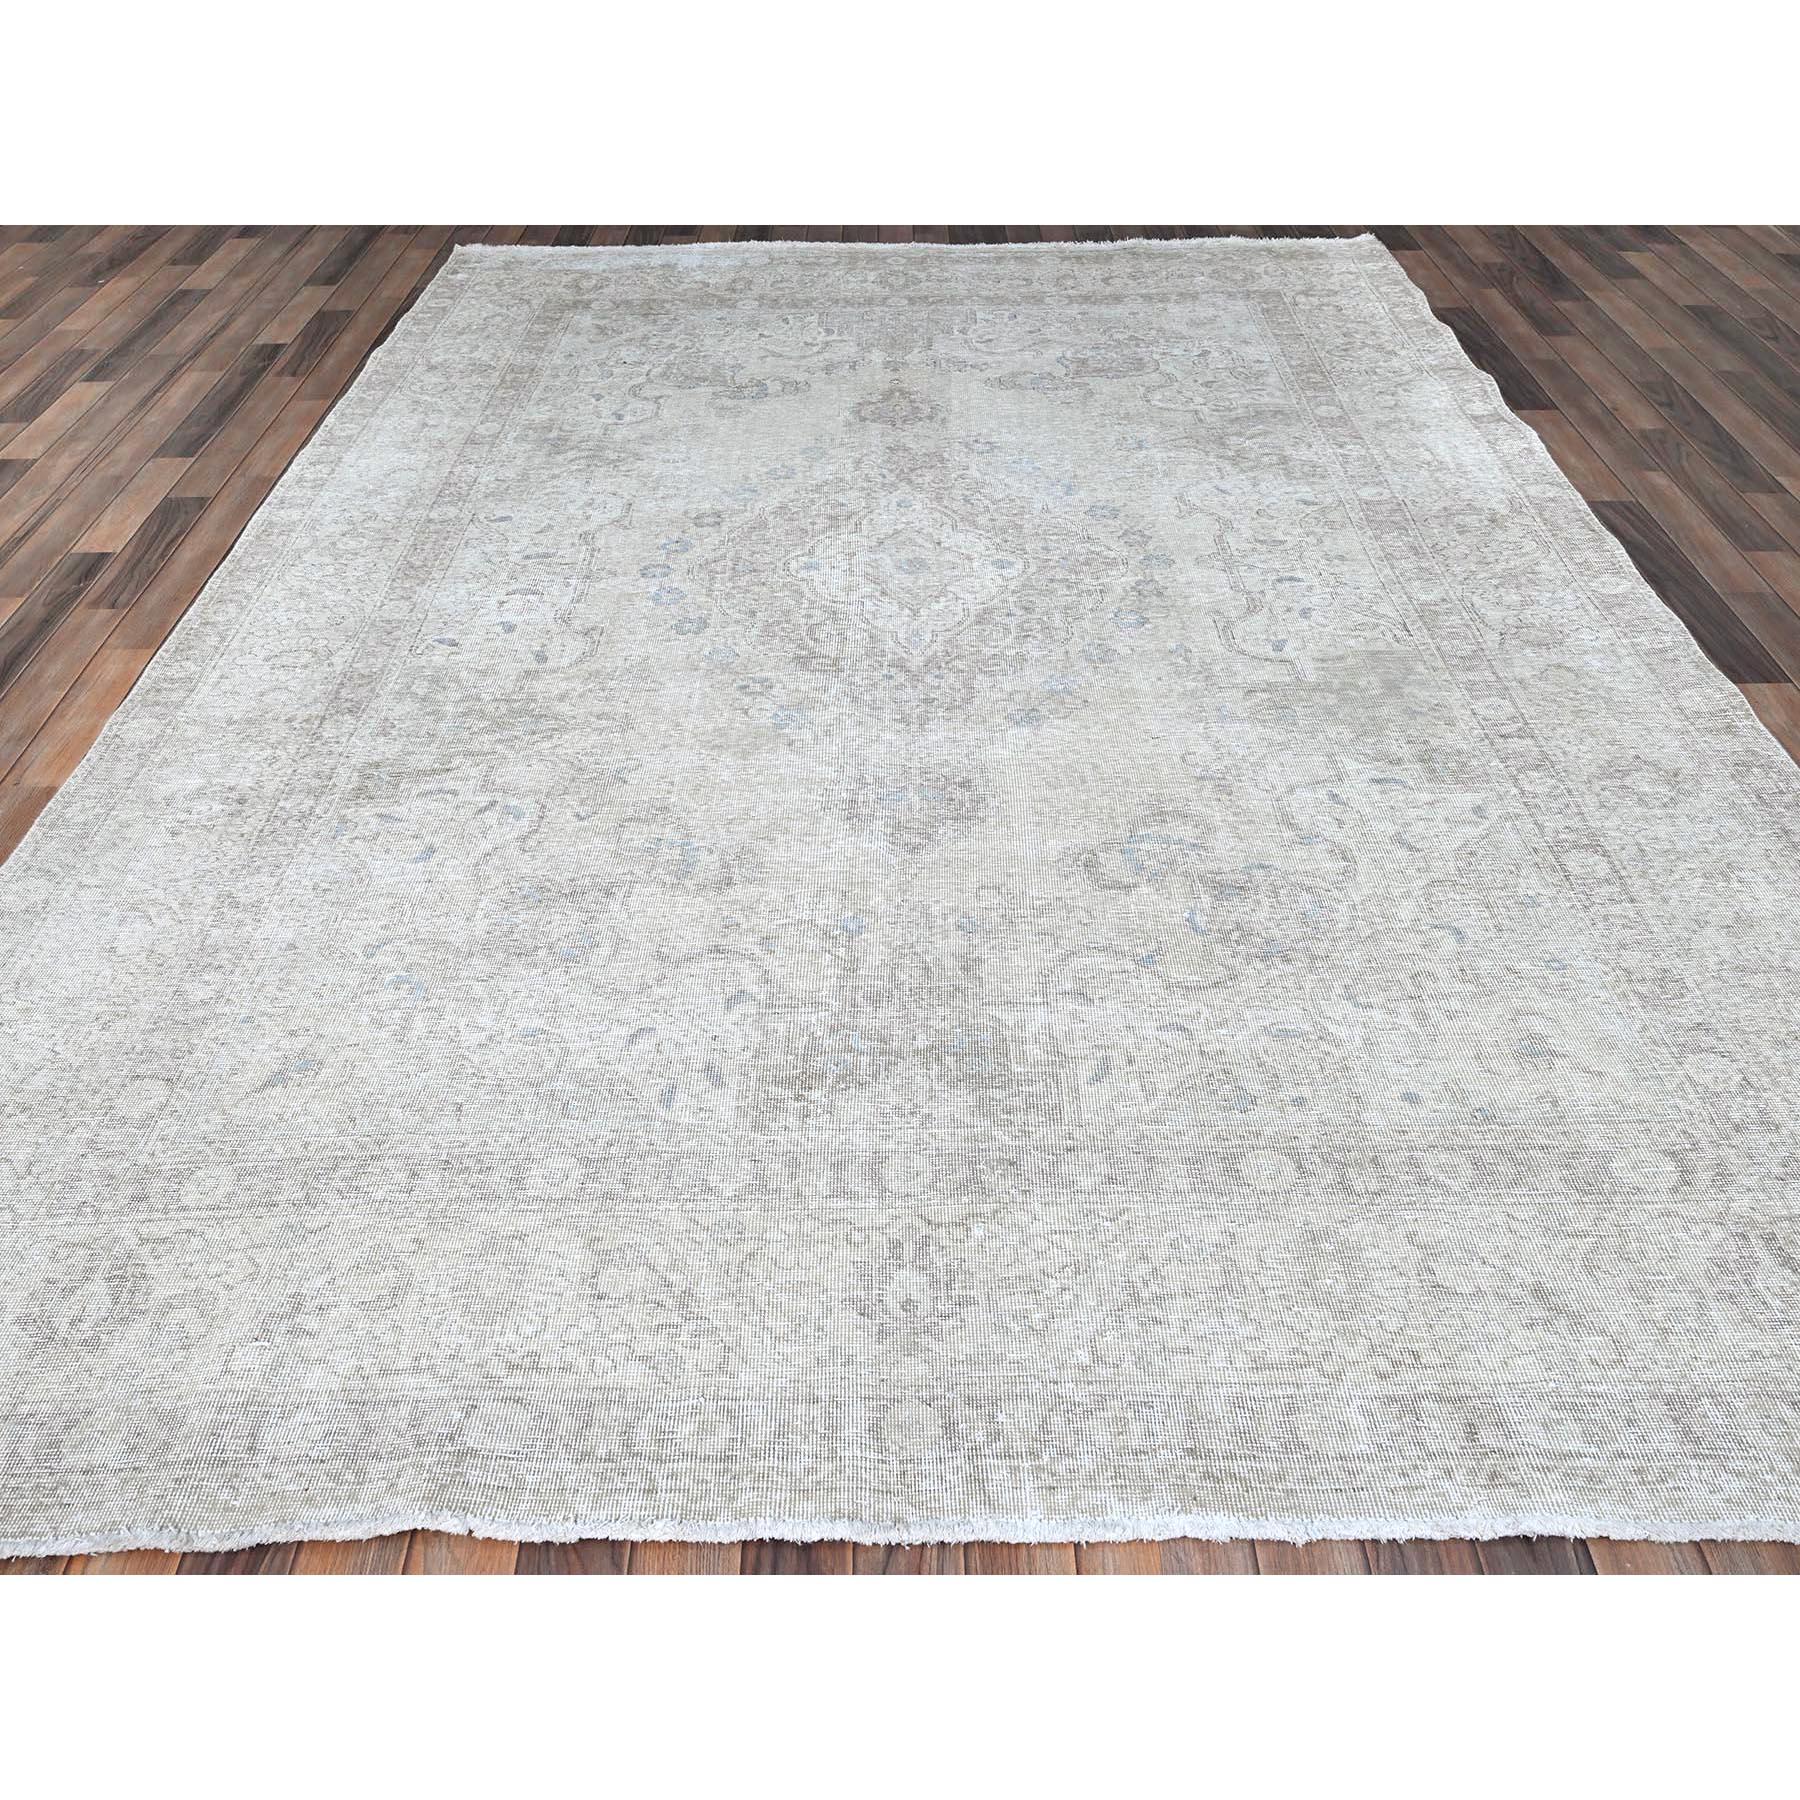 Medieval Ivory Vintage Persian Tabriz Hand Knotted Wool Rustic Look Even Wear Clean Rug For Sale